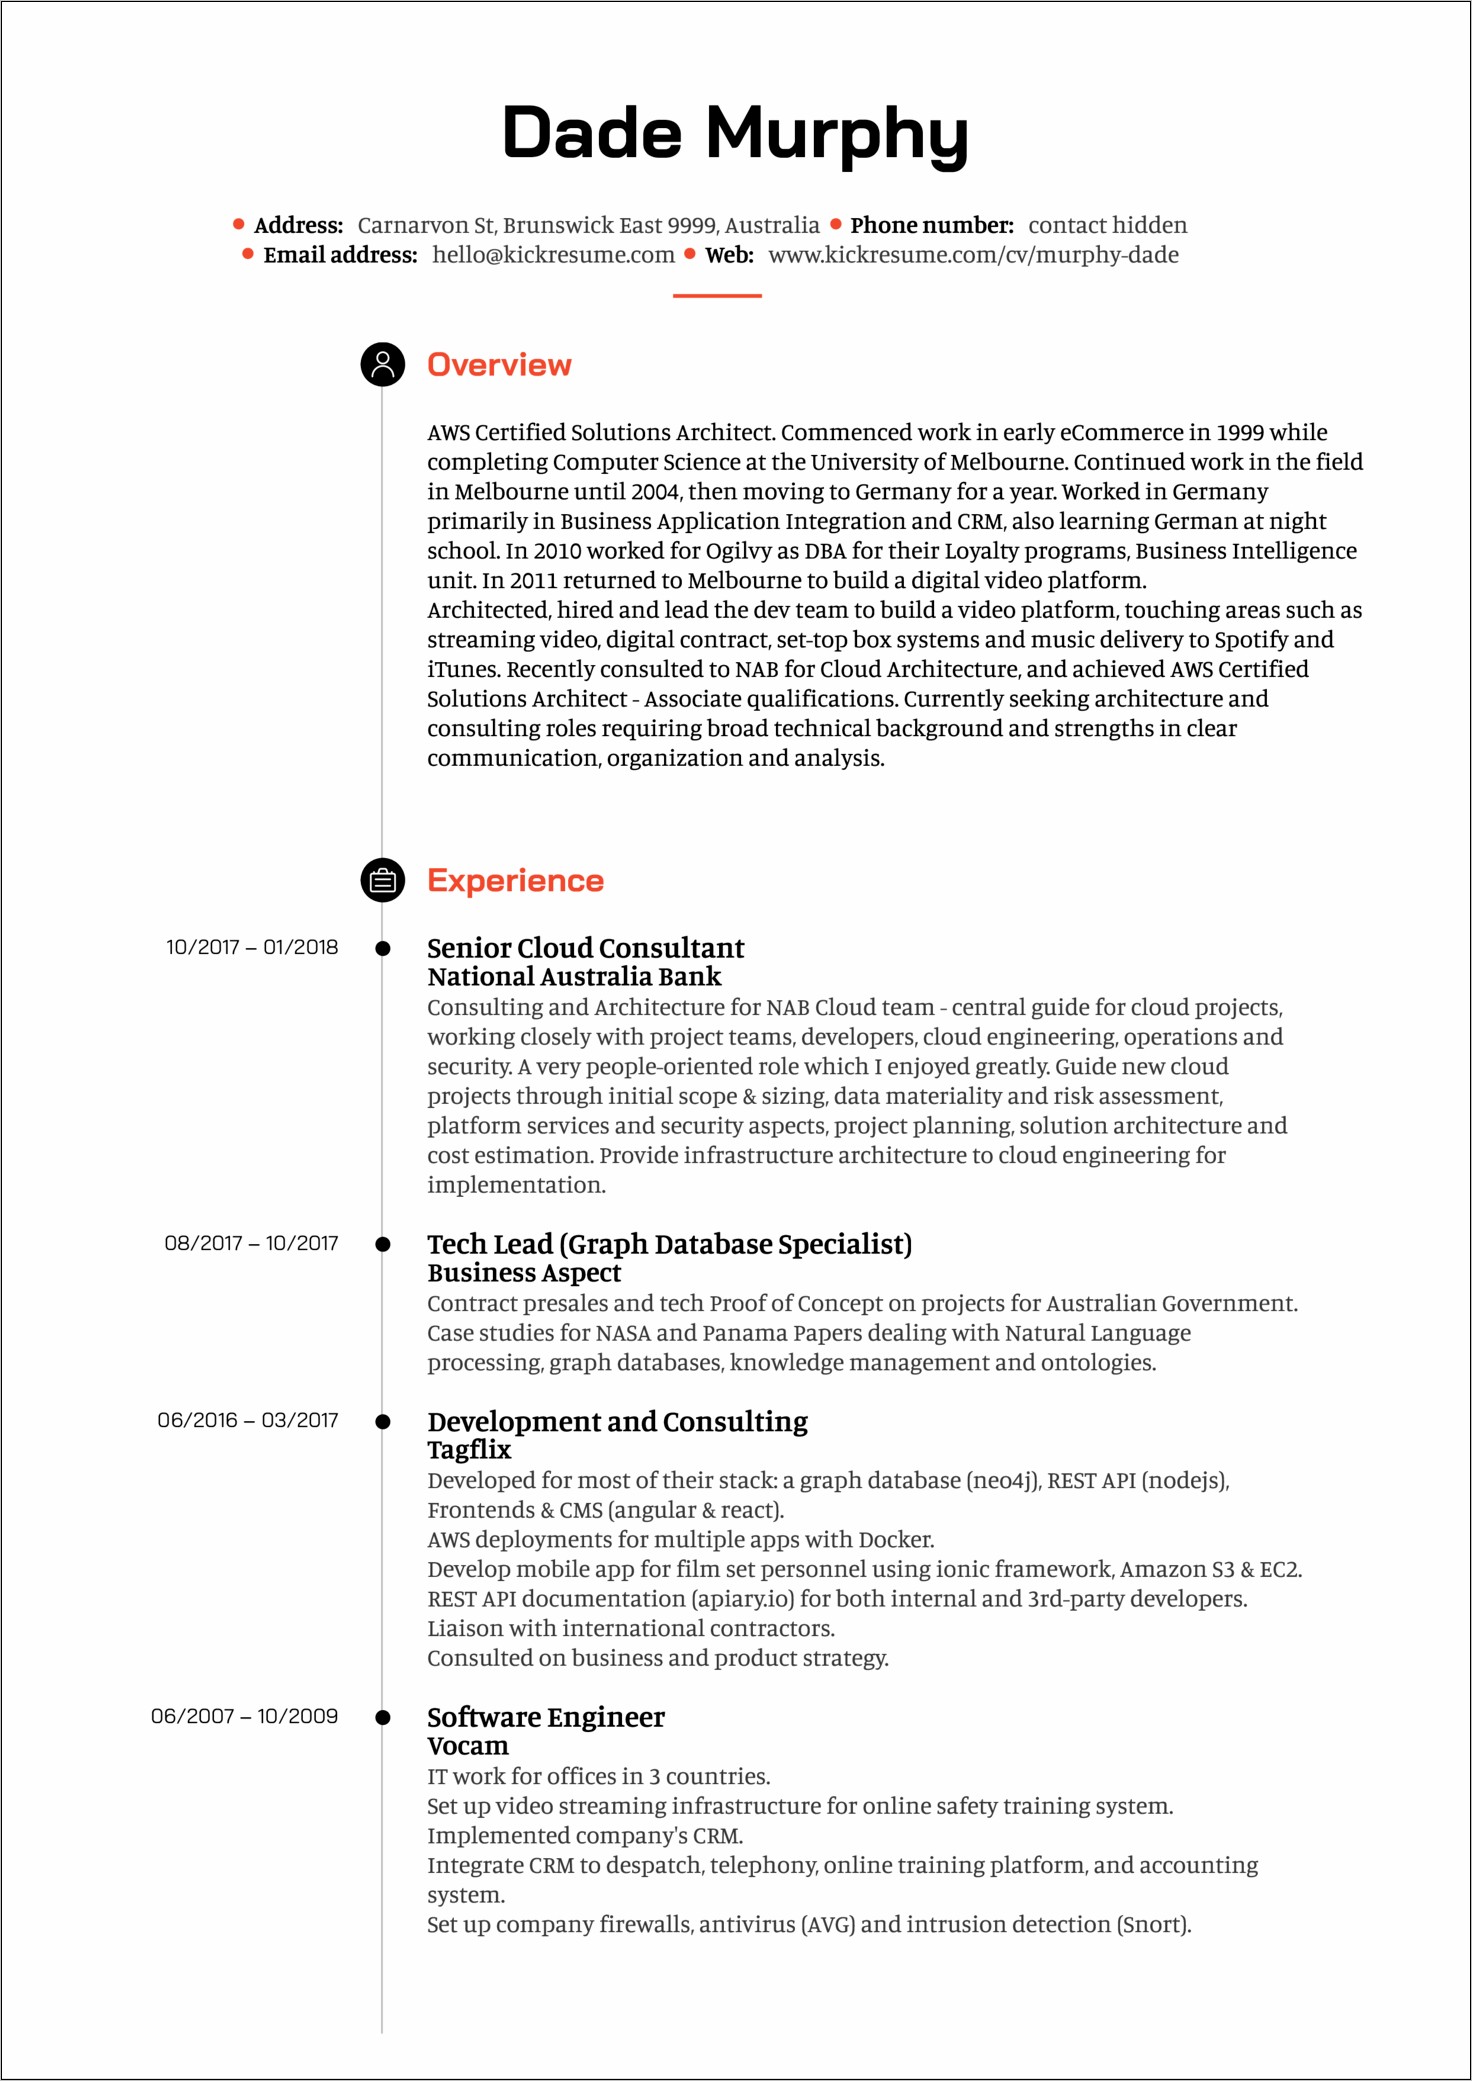 Examples Of 2018 Banking Resumes